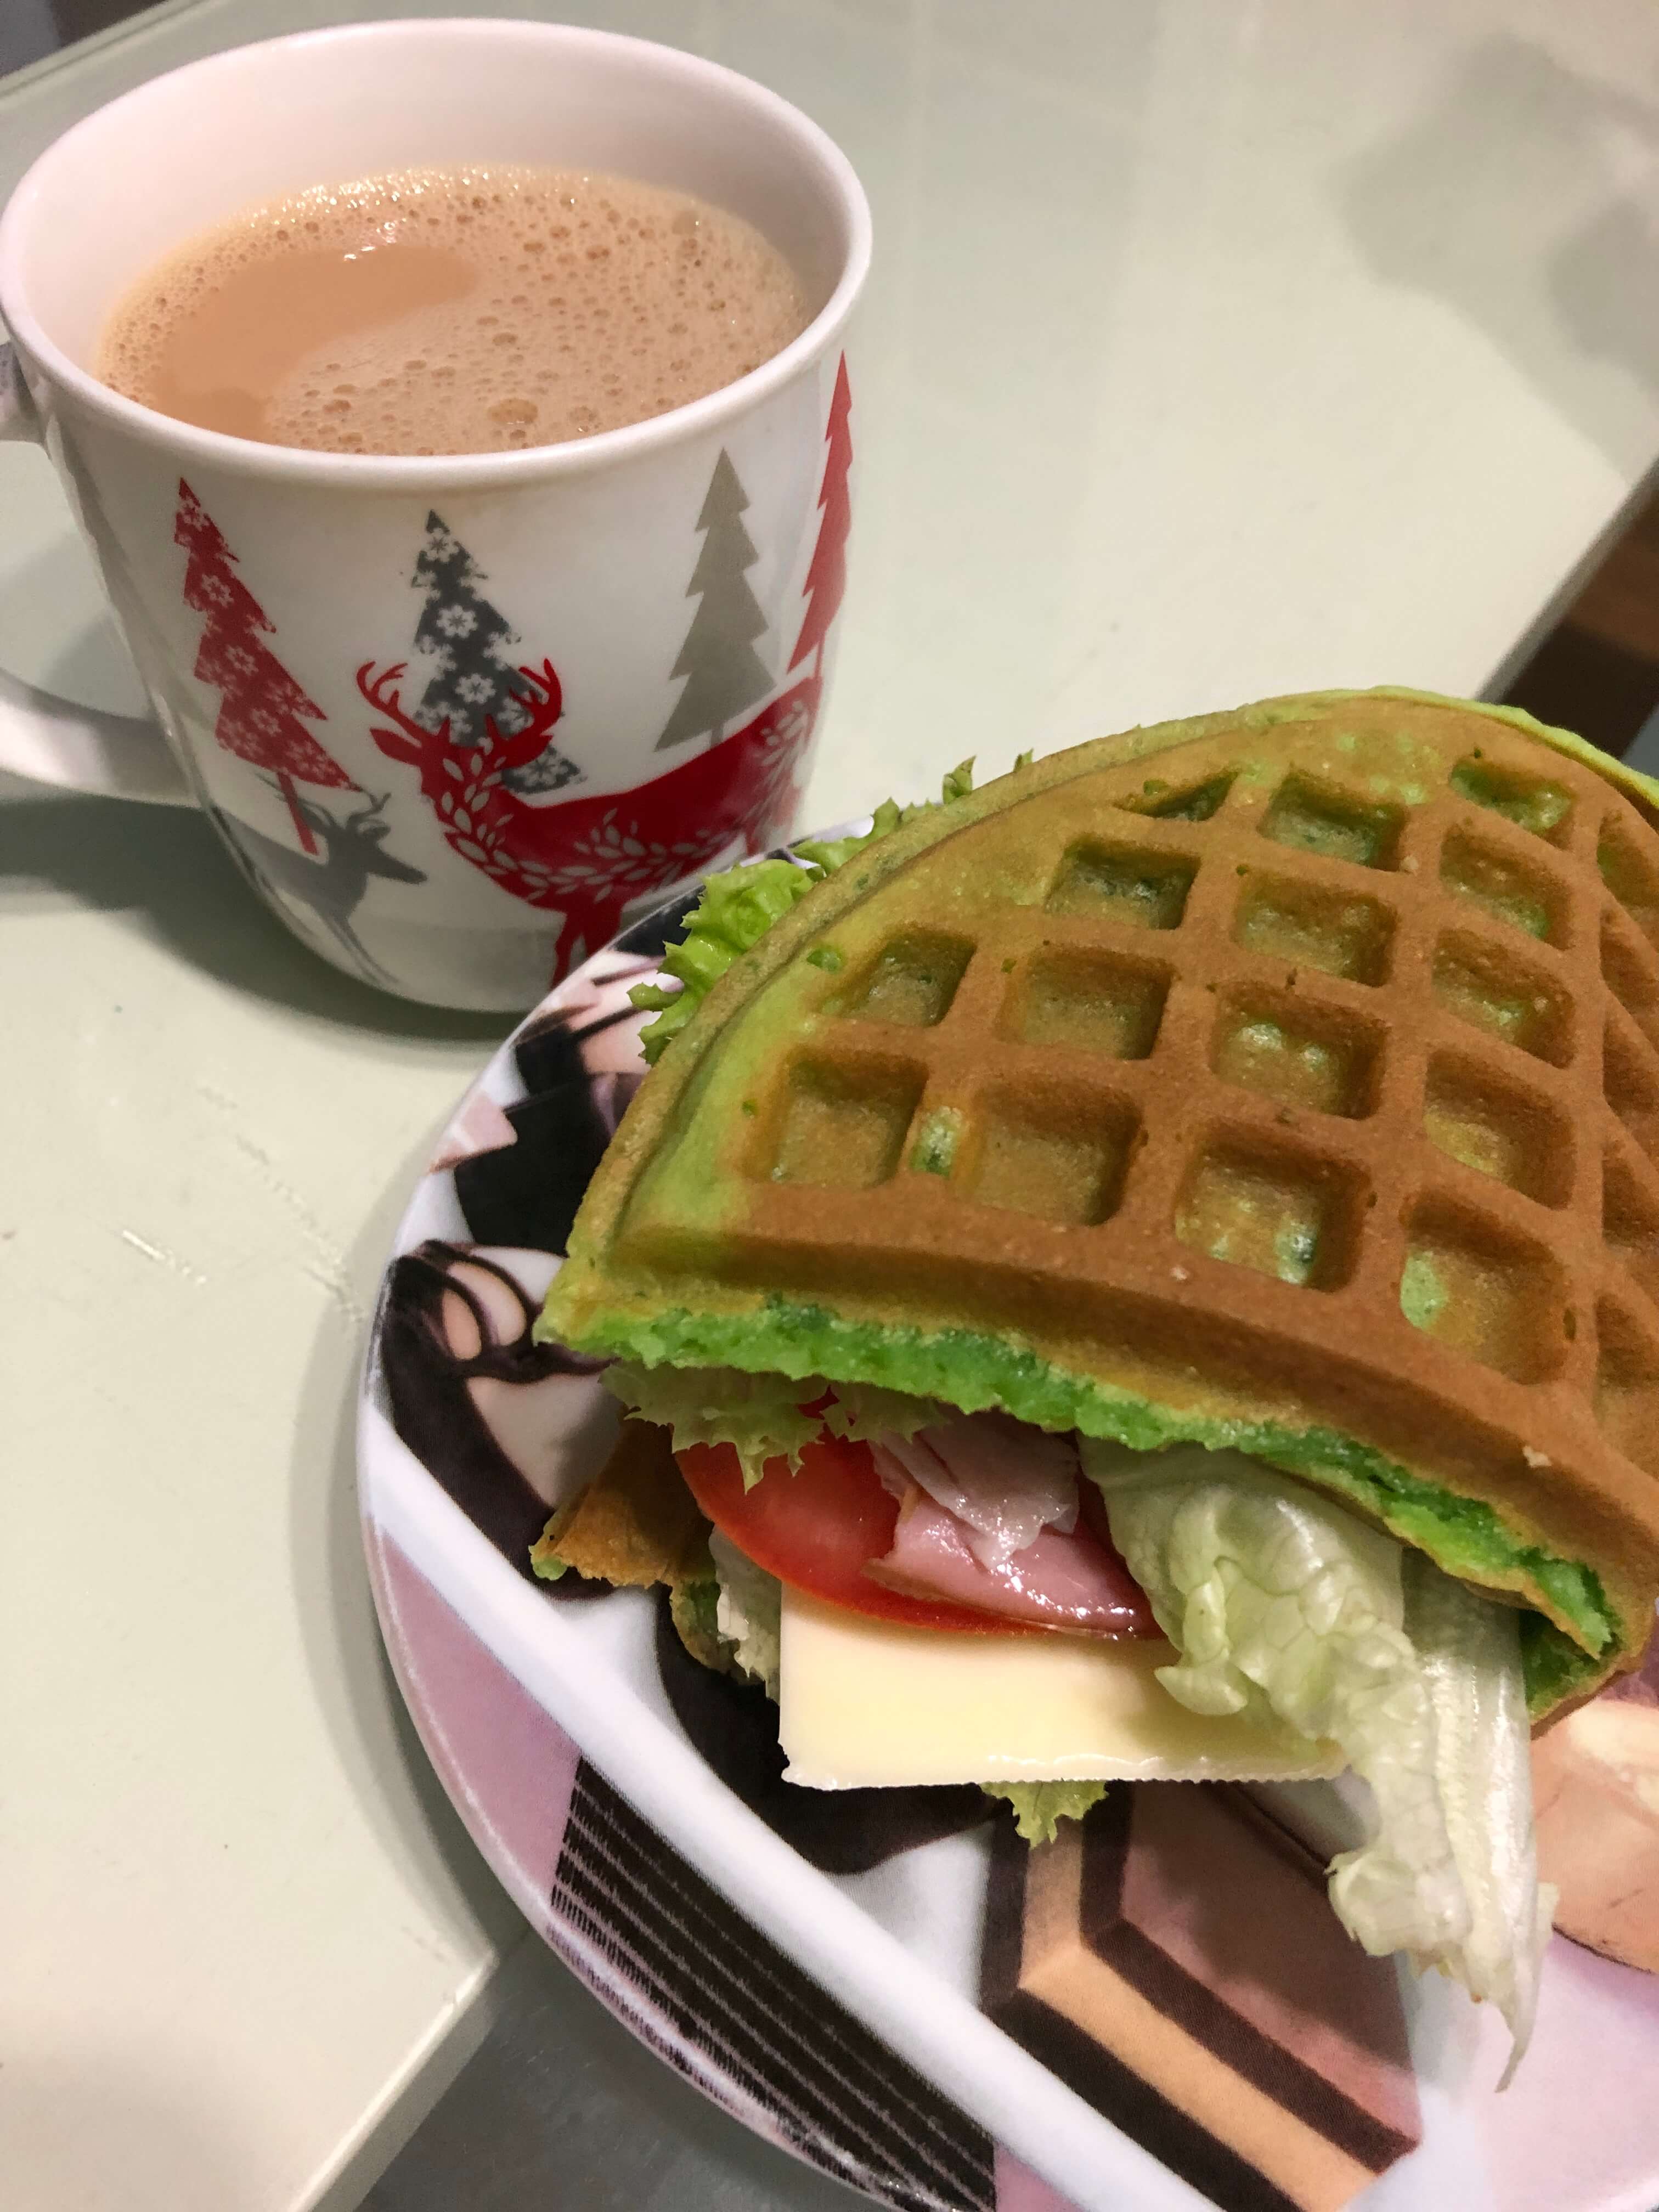 Our Fav Local Waffle, The Sandwich Way